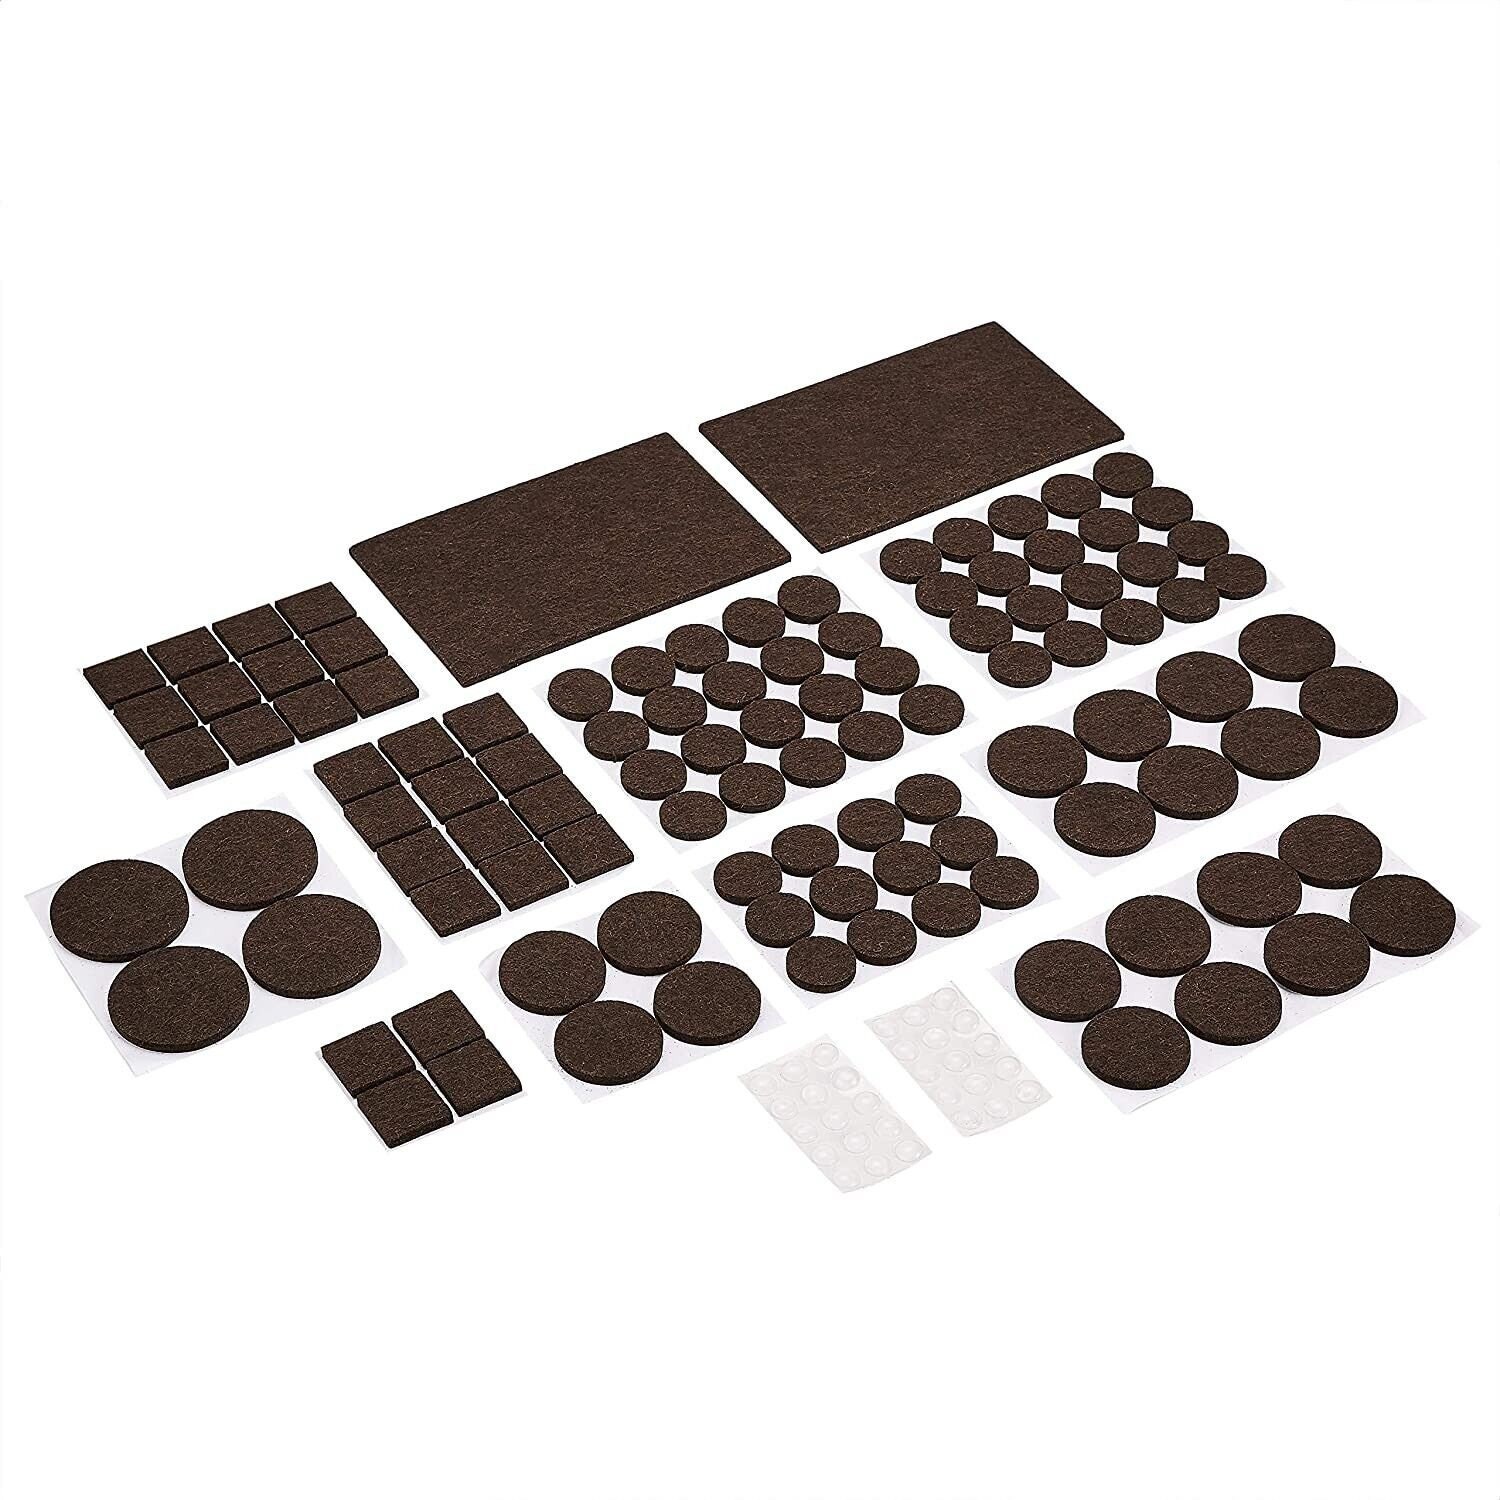 Felt Furniture Pads 136 Pieces, Felt Pads for Furniture Black 5mm Thick, Floor Savers for Furniture Anti Scratch, Best Floor Protectors with Case